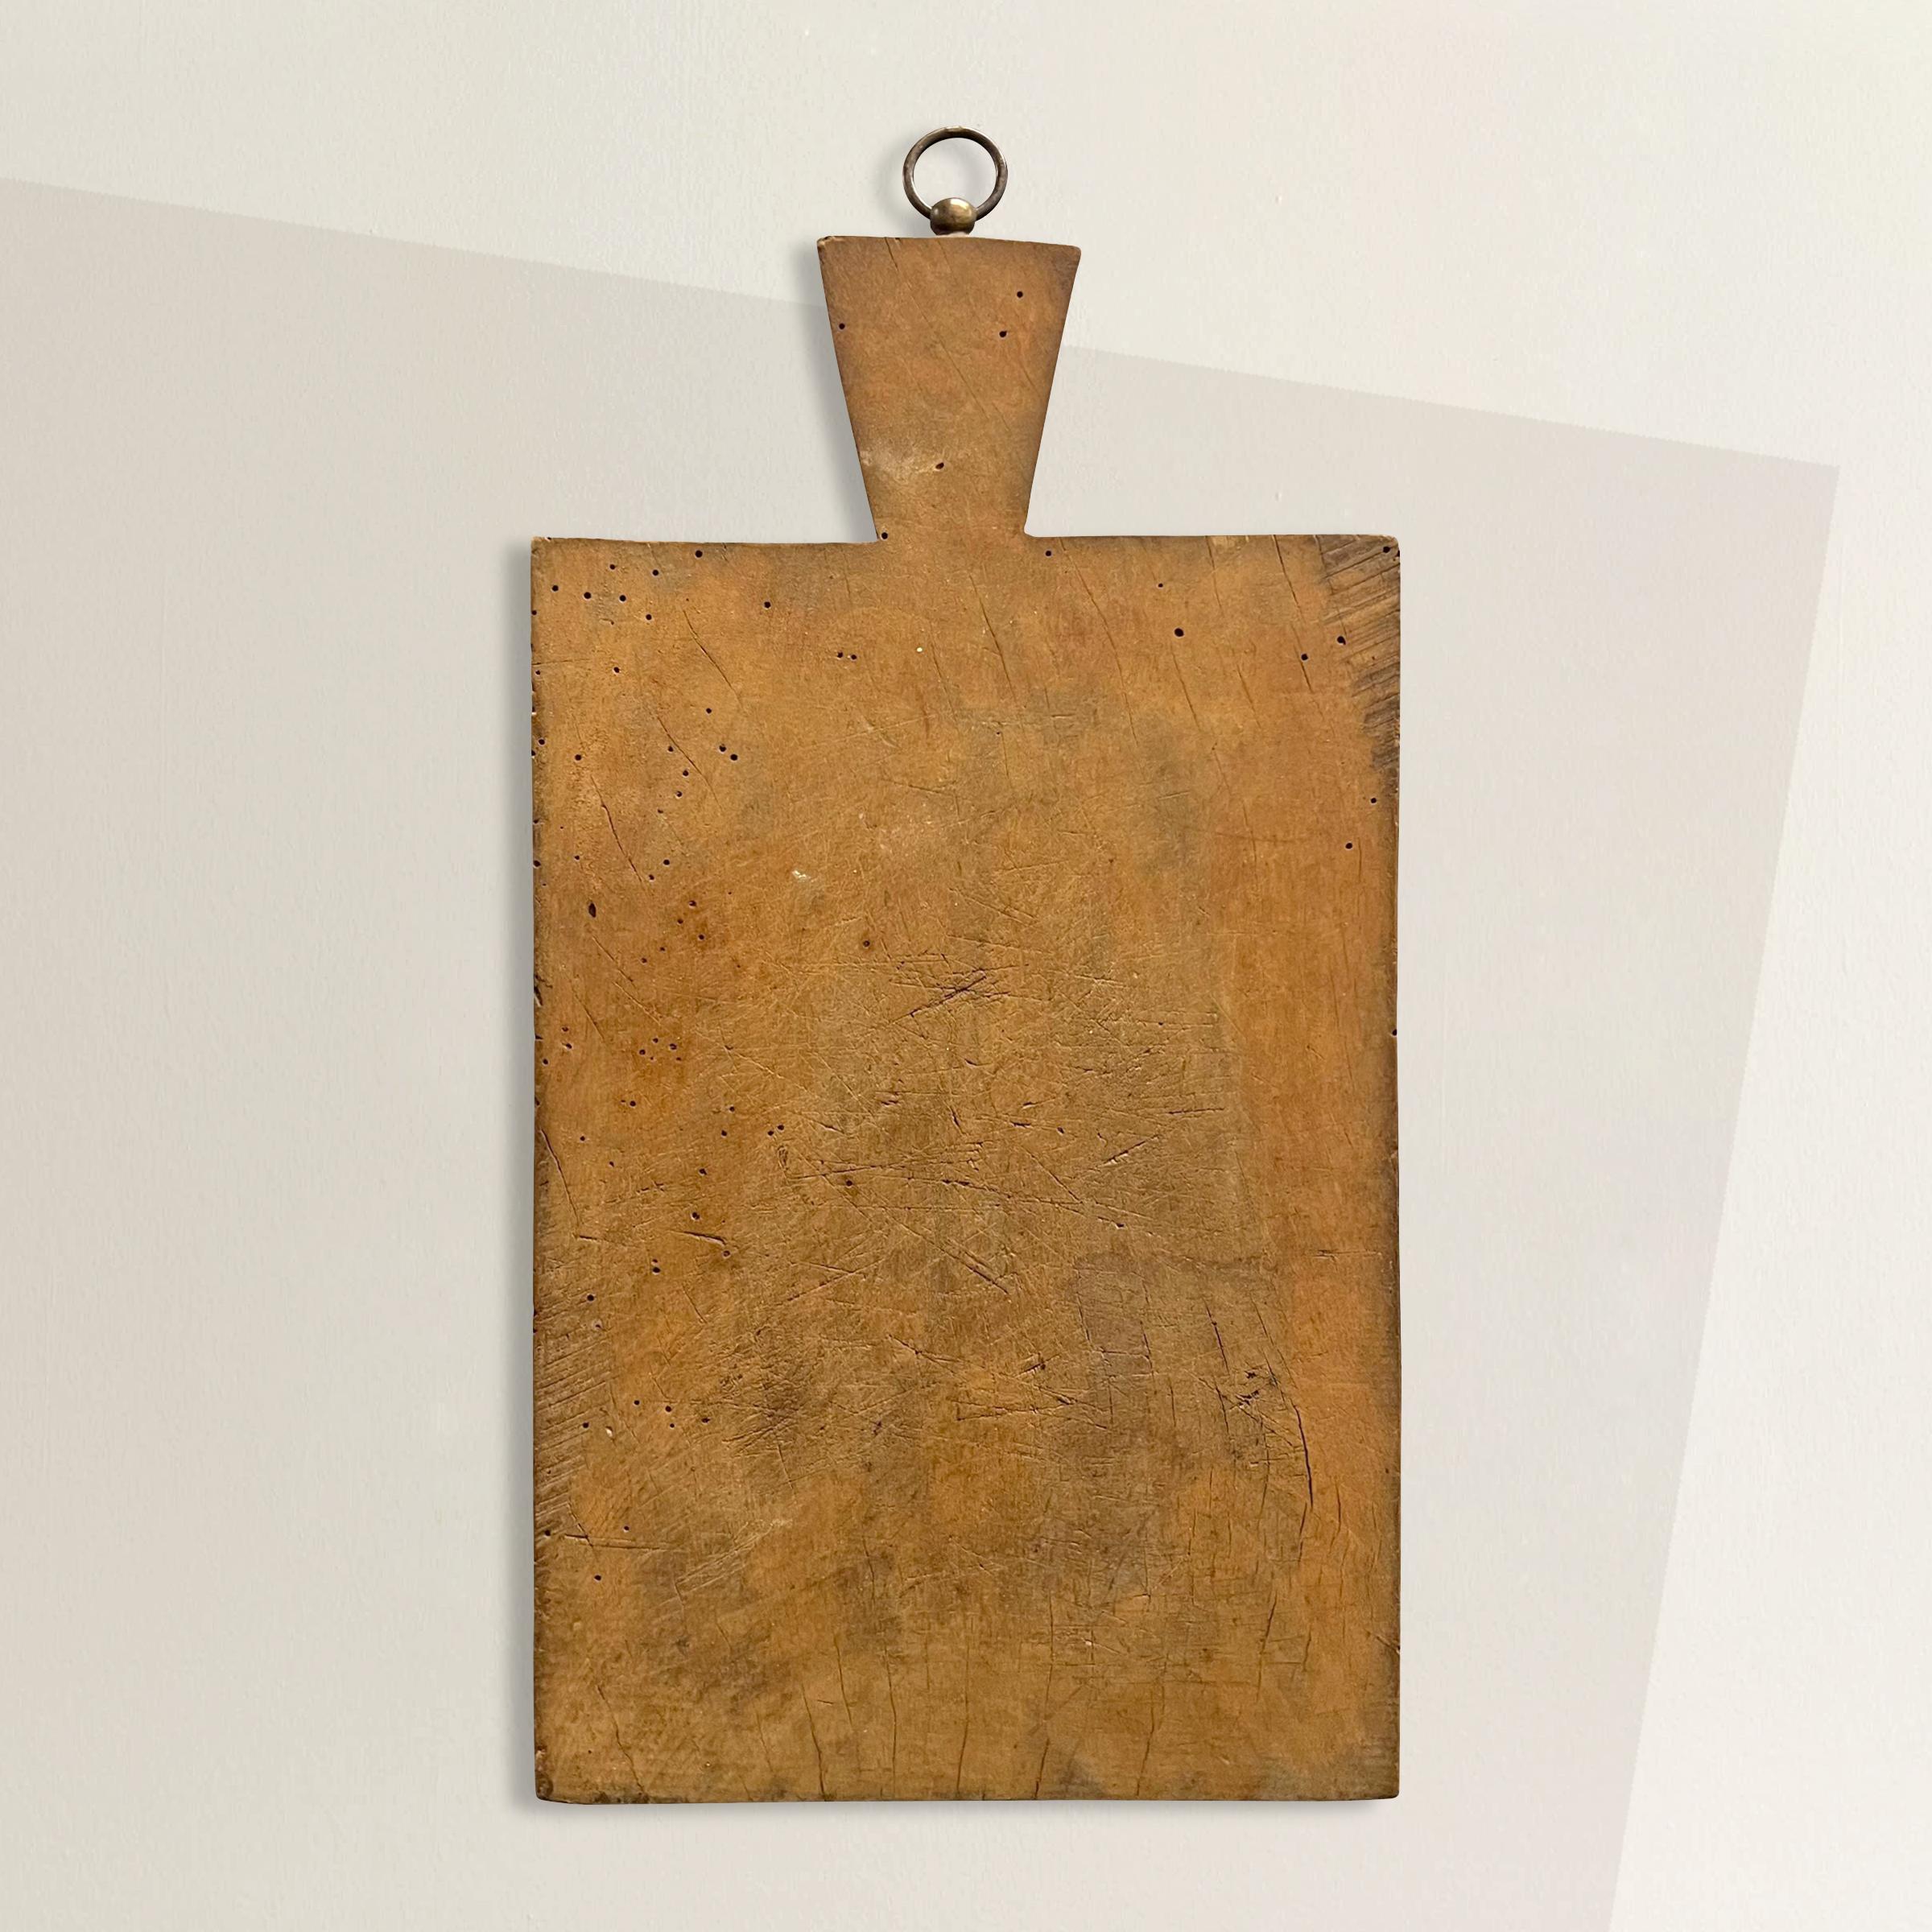 A wonderful early 20th century French cutting board with hundreds of knife marks, a brass ring for hanging, and a patina that only time can bestow. Perfect for chopping vegetables and bread, or serving cheese and charcuterie at your next fête.